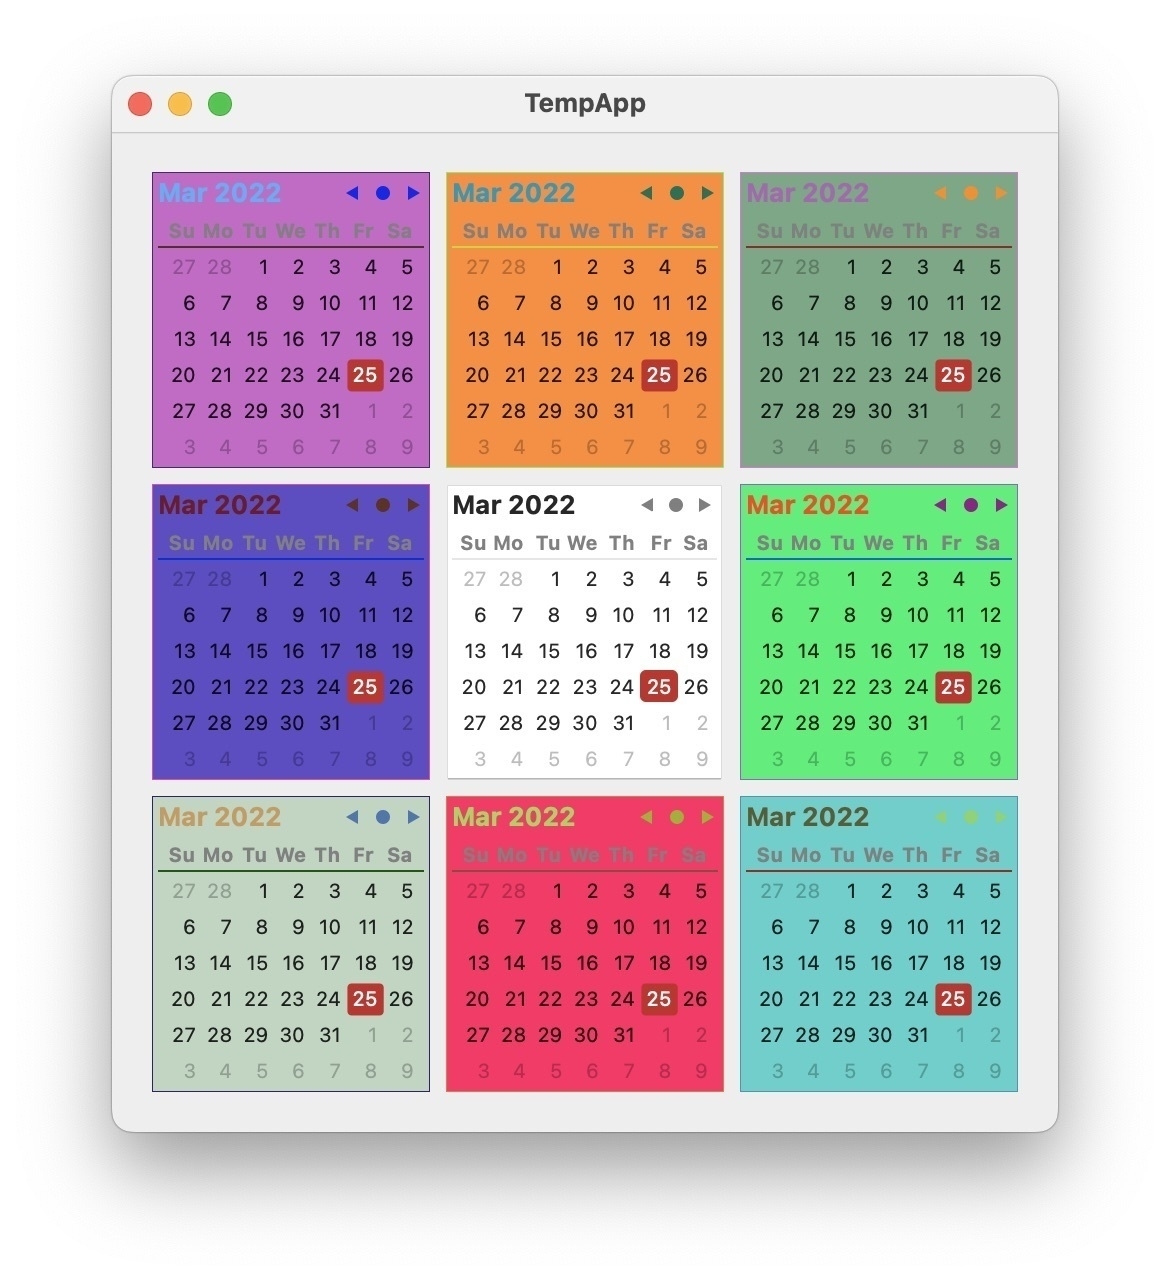 Screenshot of test debugging app with standard Apple calendar in the center and a variety of differently colored calendars around it.